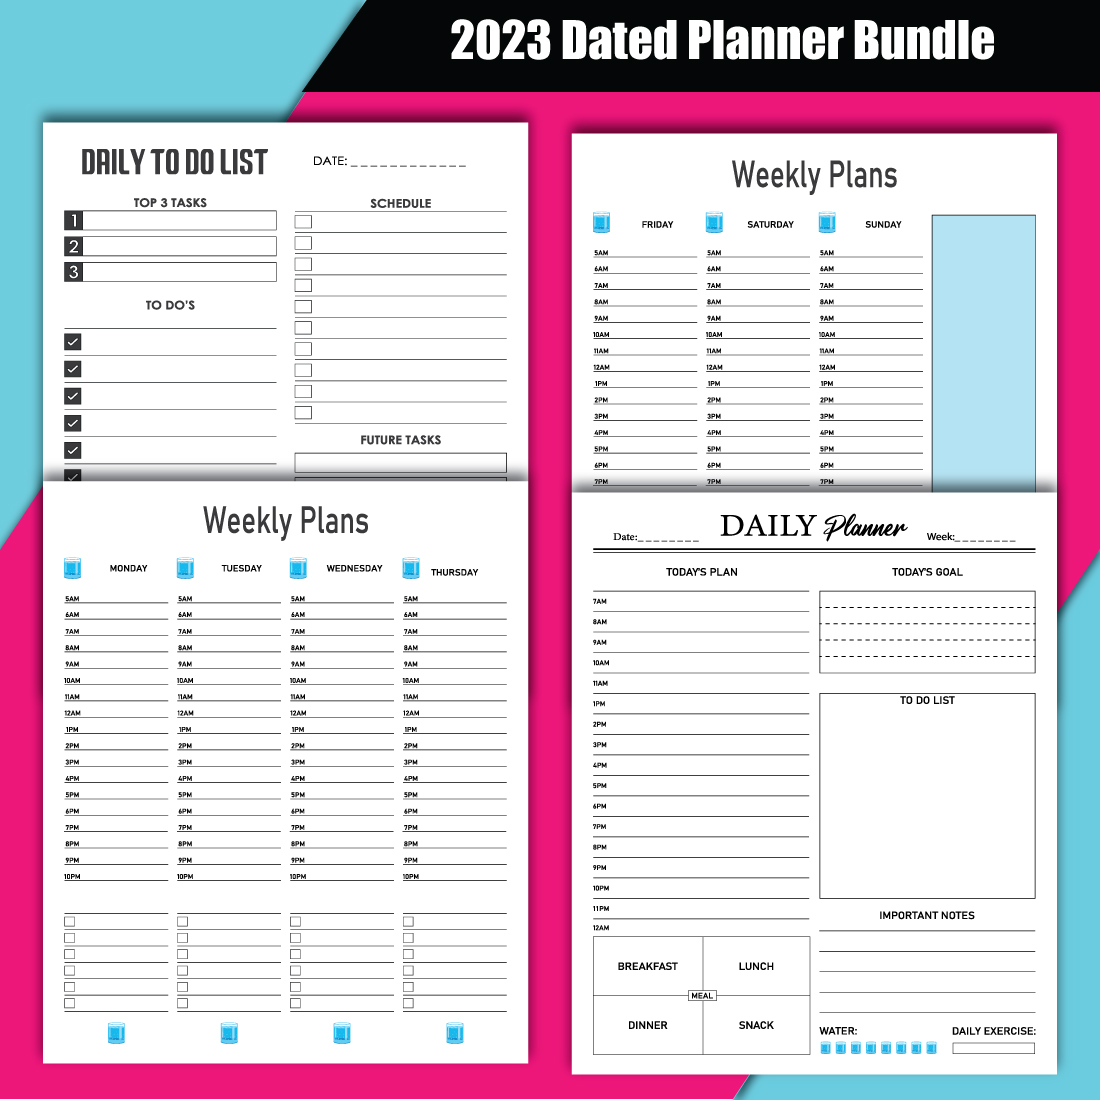 2023 Dated Planner Bundle preview image.